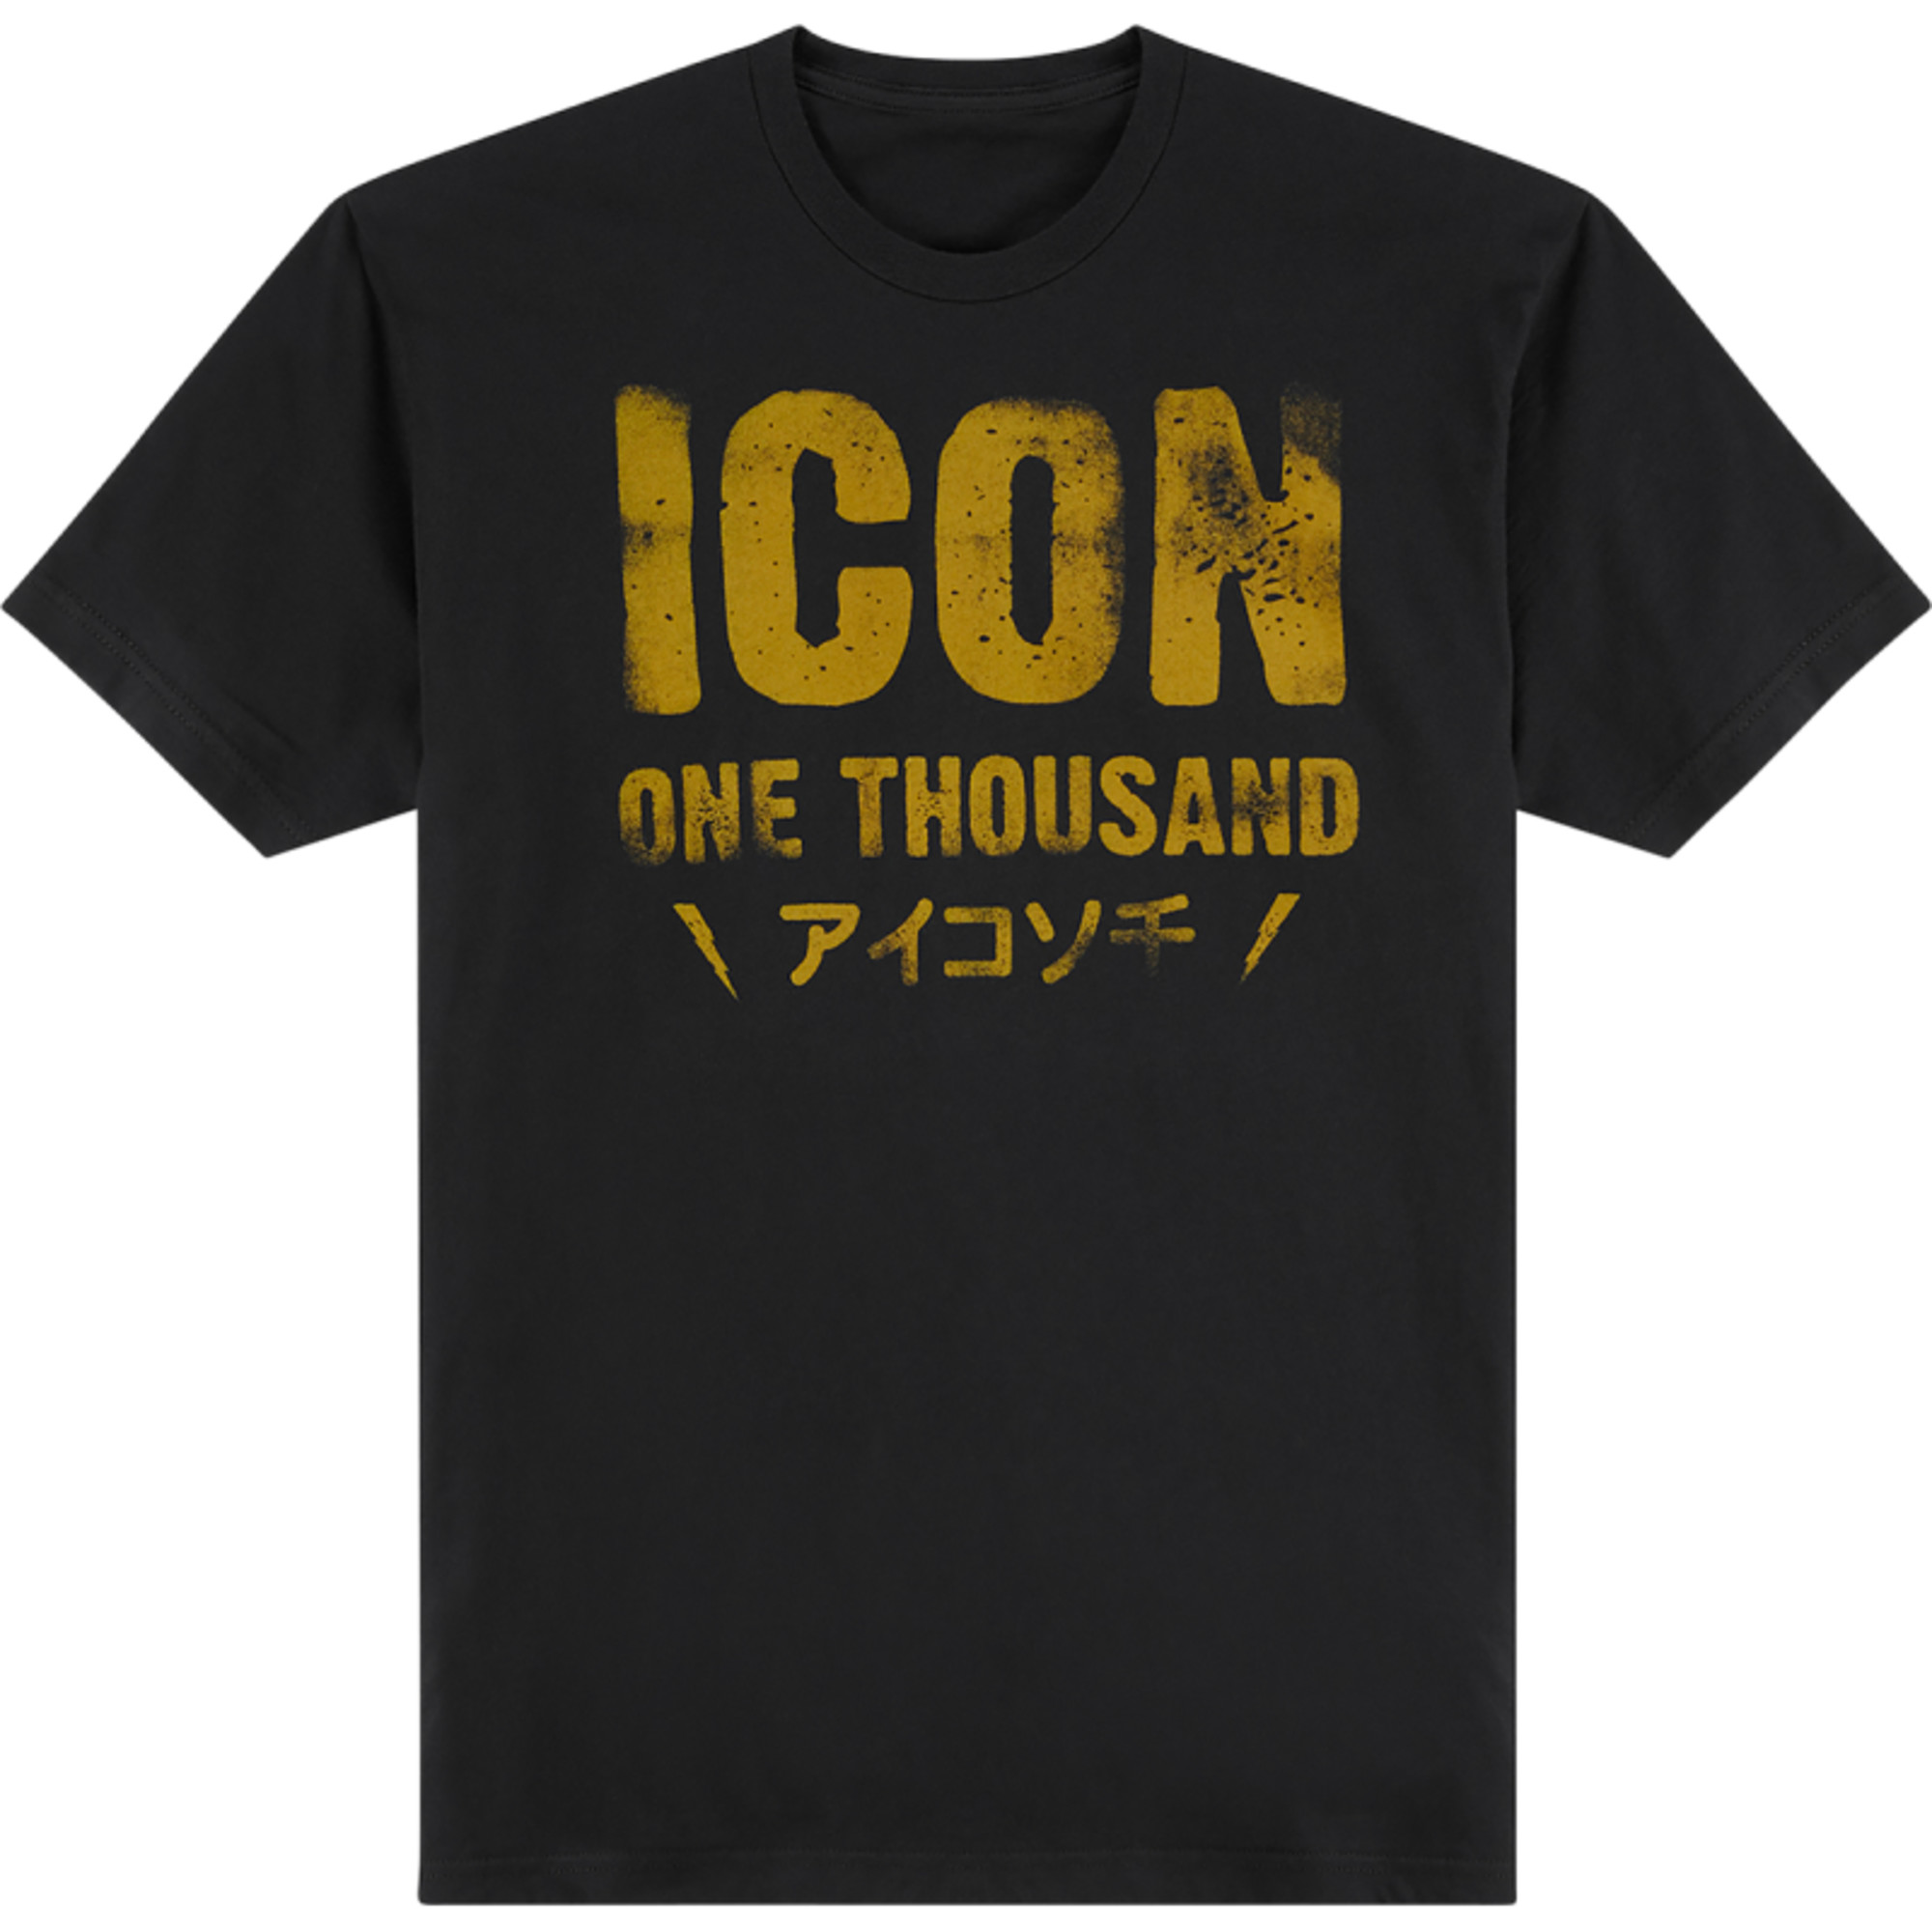 icon t-shirt shirts for men one thousand statefor ment